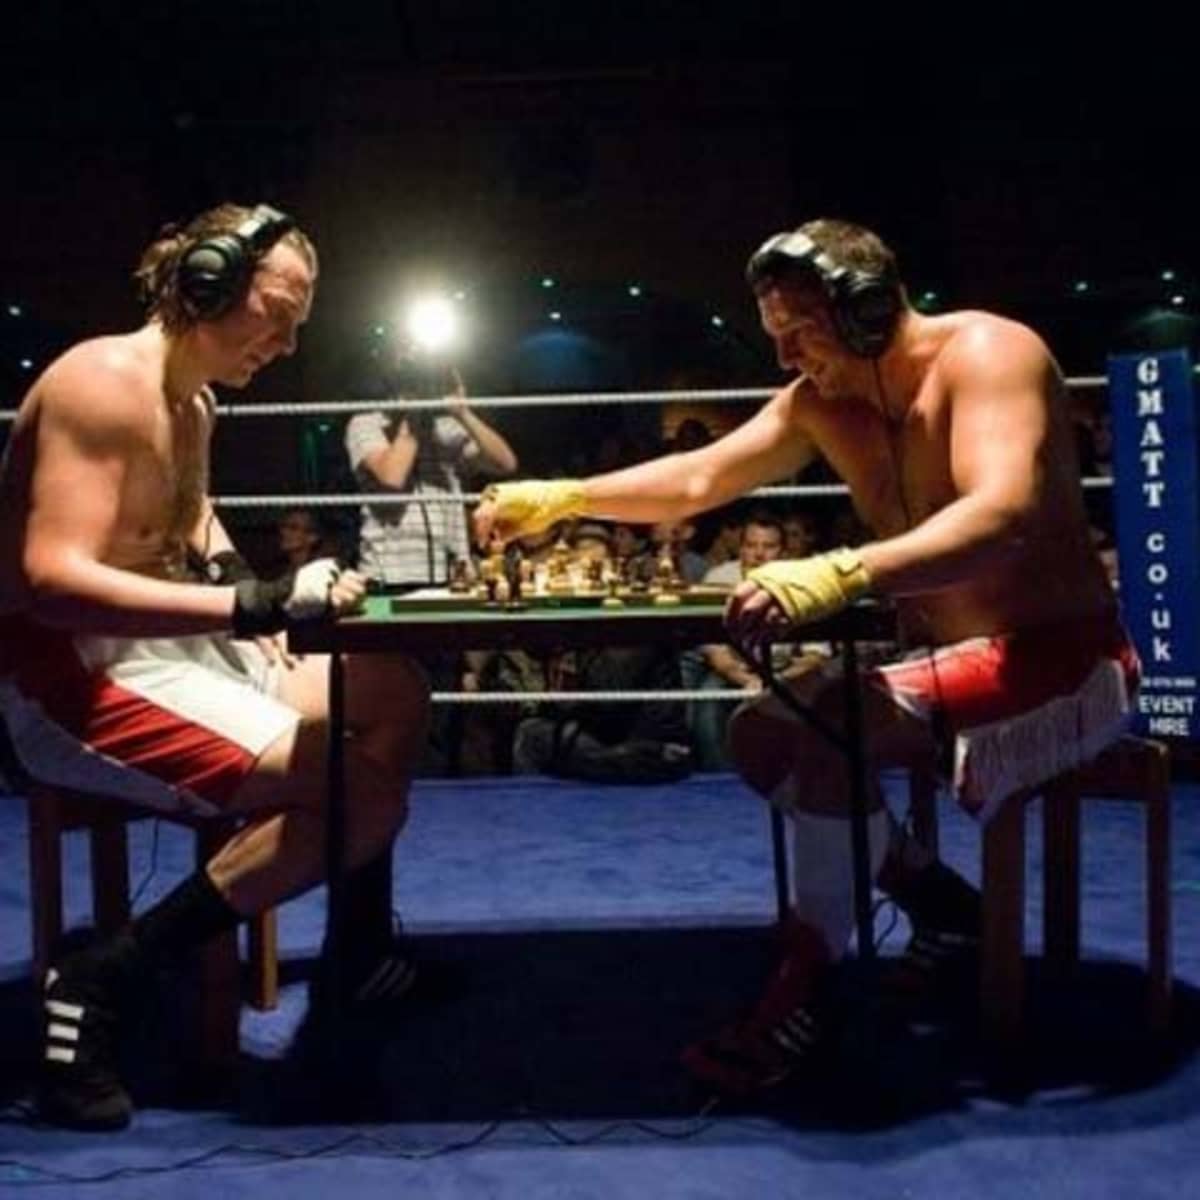 Chessboxing: World Middleweight Championship LIVE